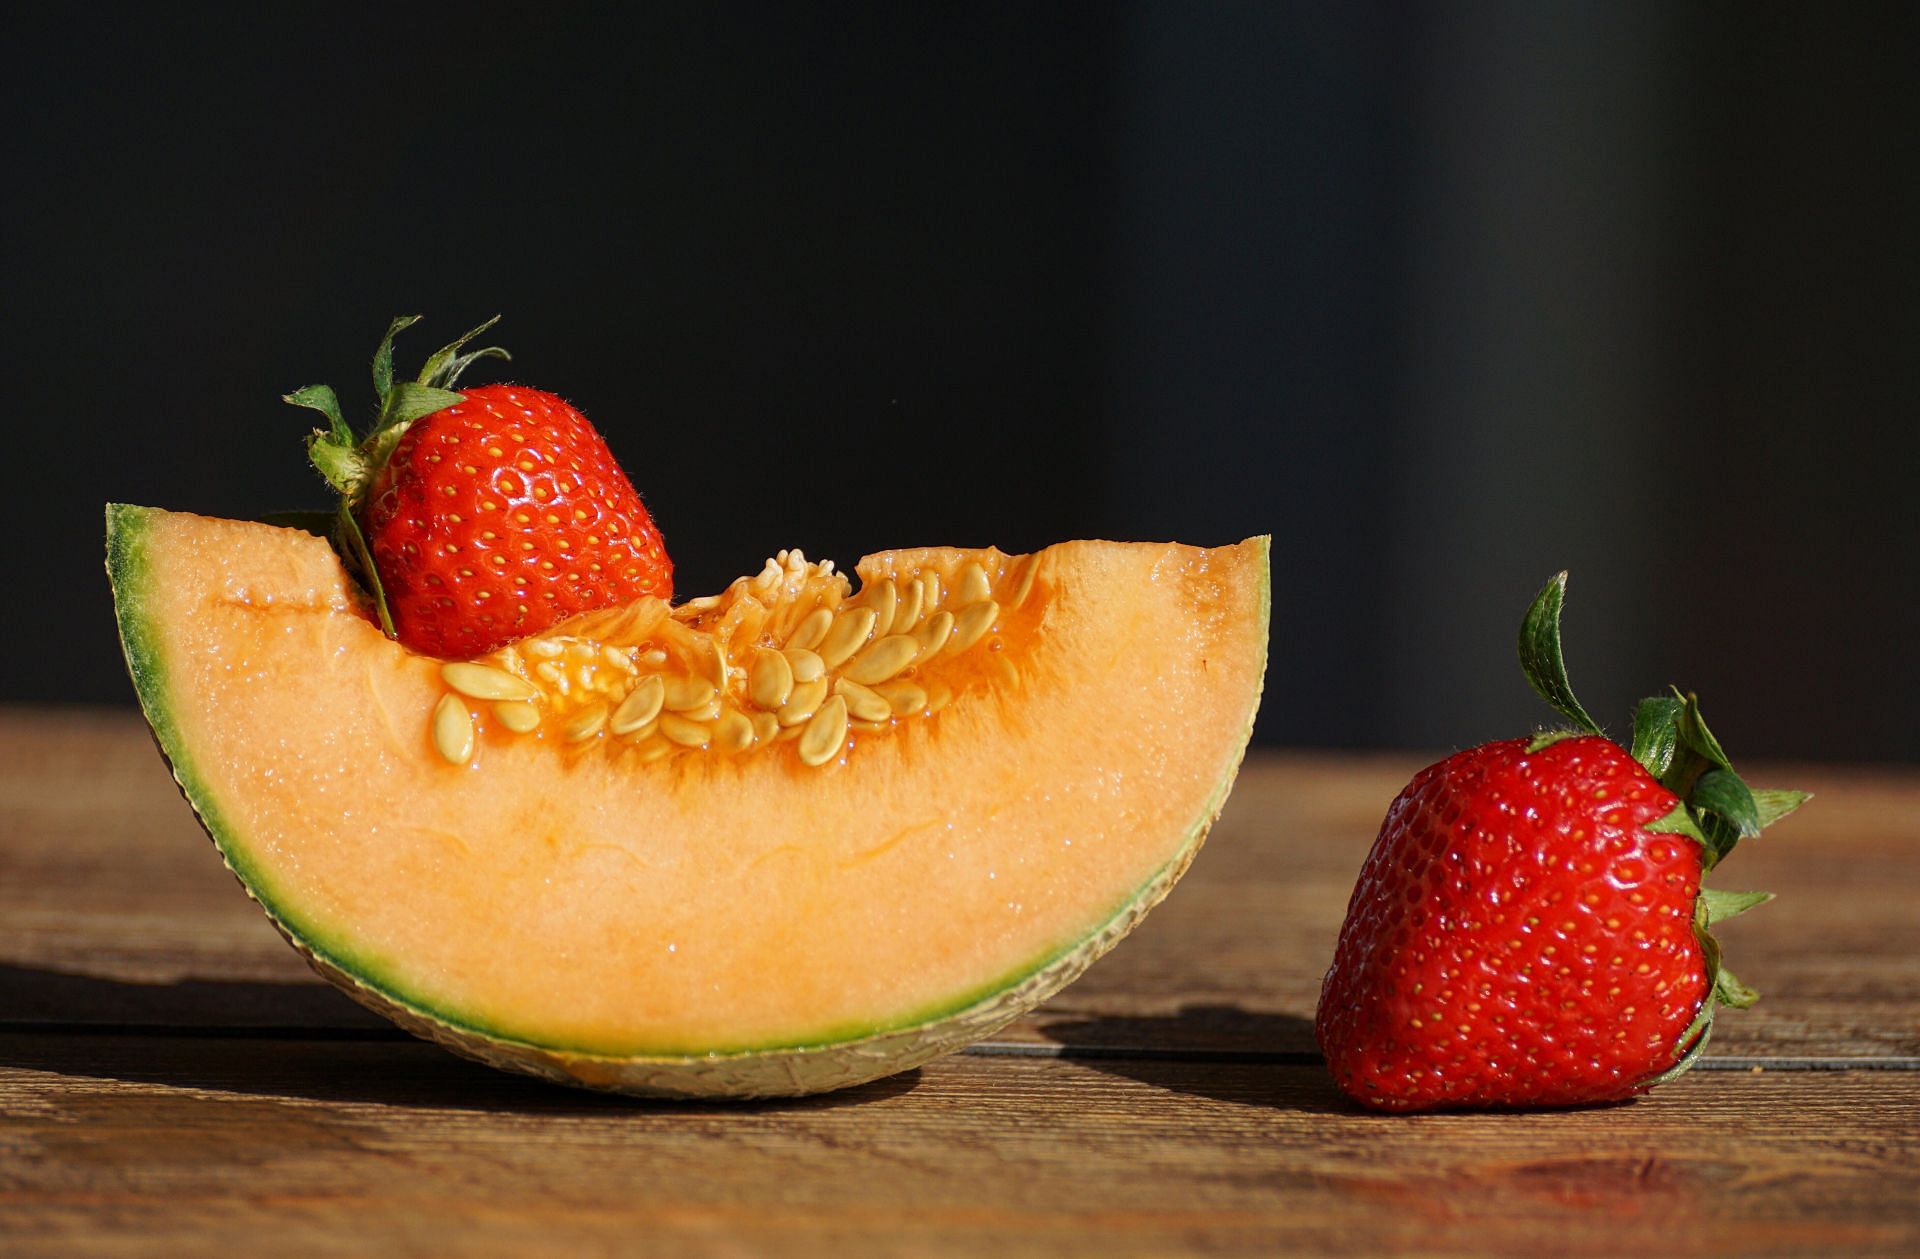 Melons for fresh breath (image sourced via Pexels / Photo by susanne)